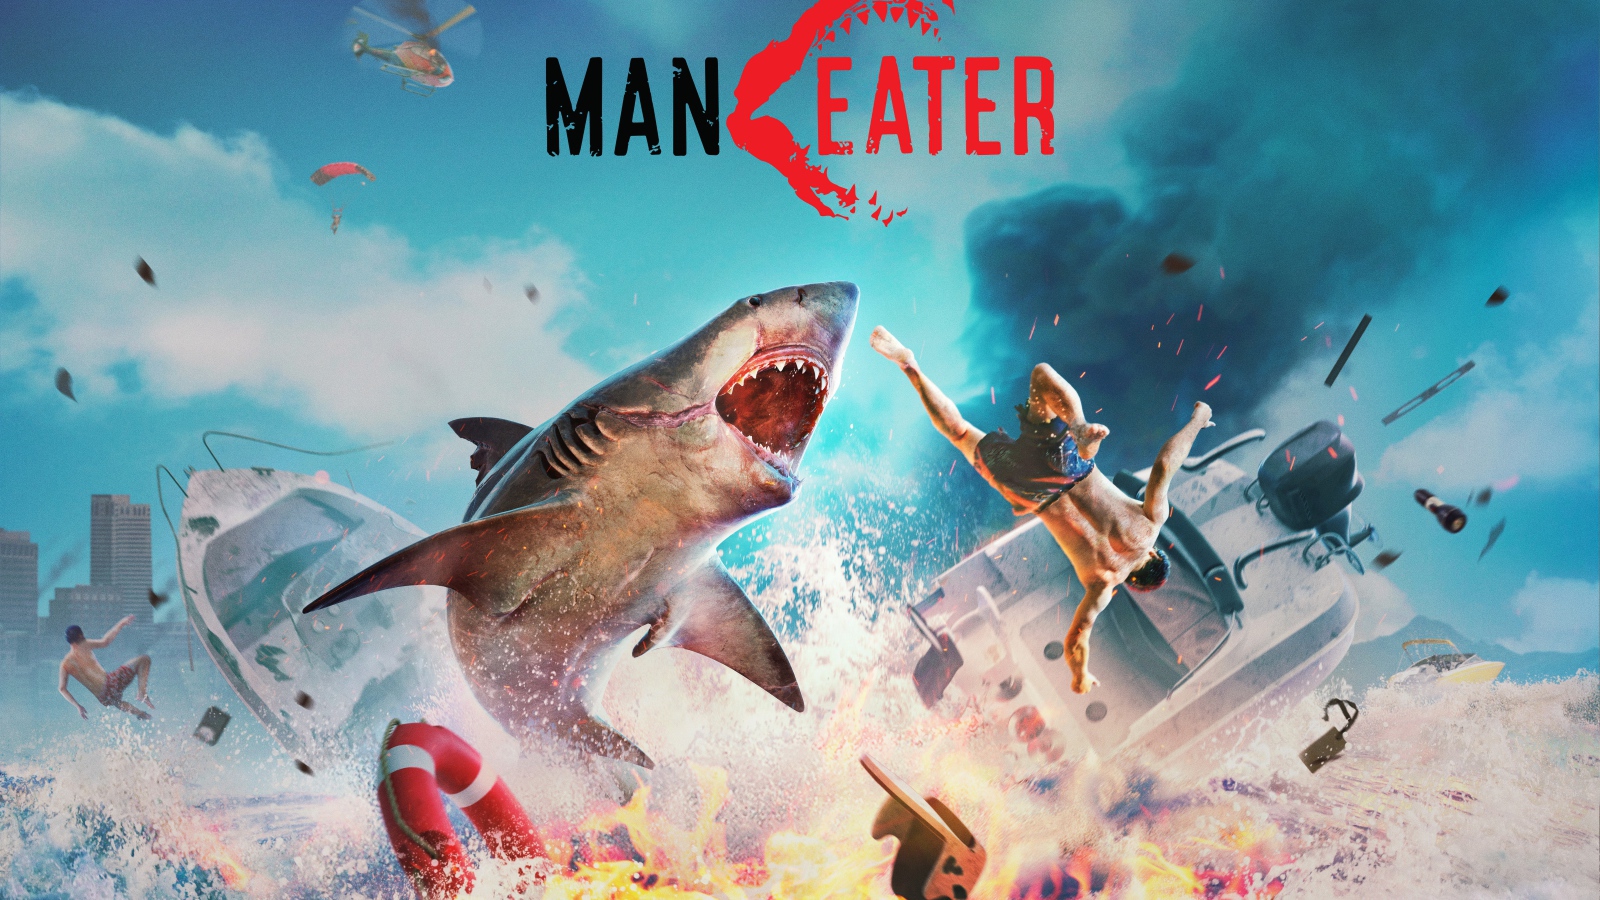 Maneater video game poster, 2020